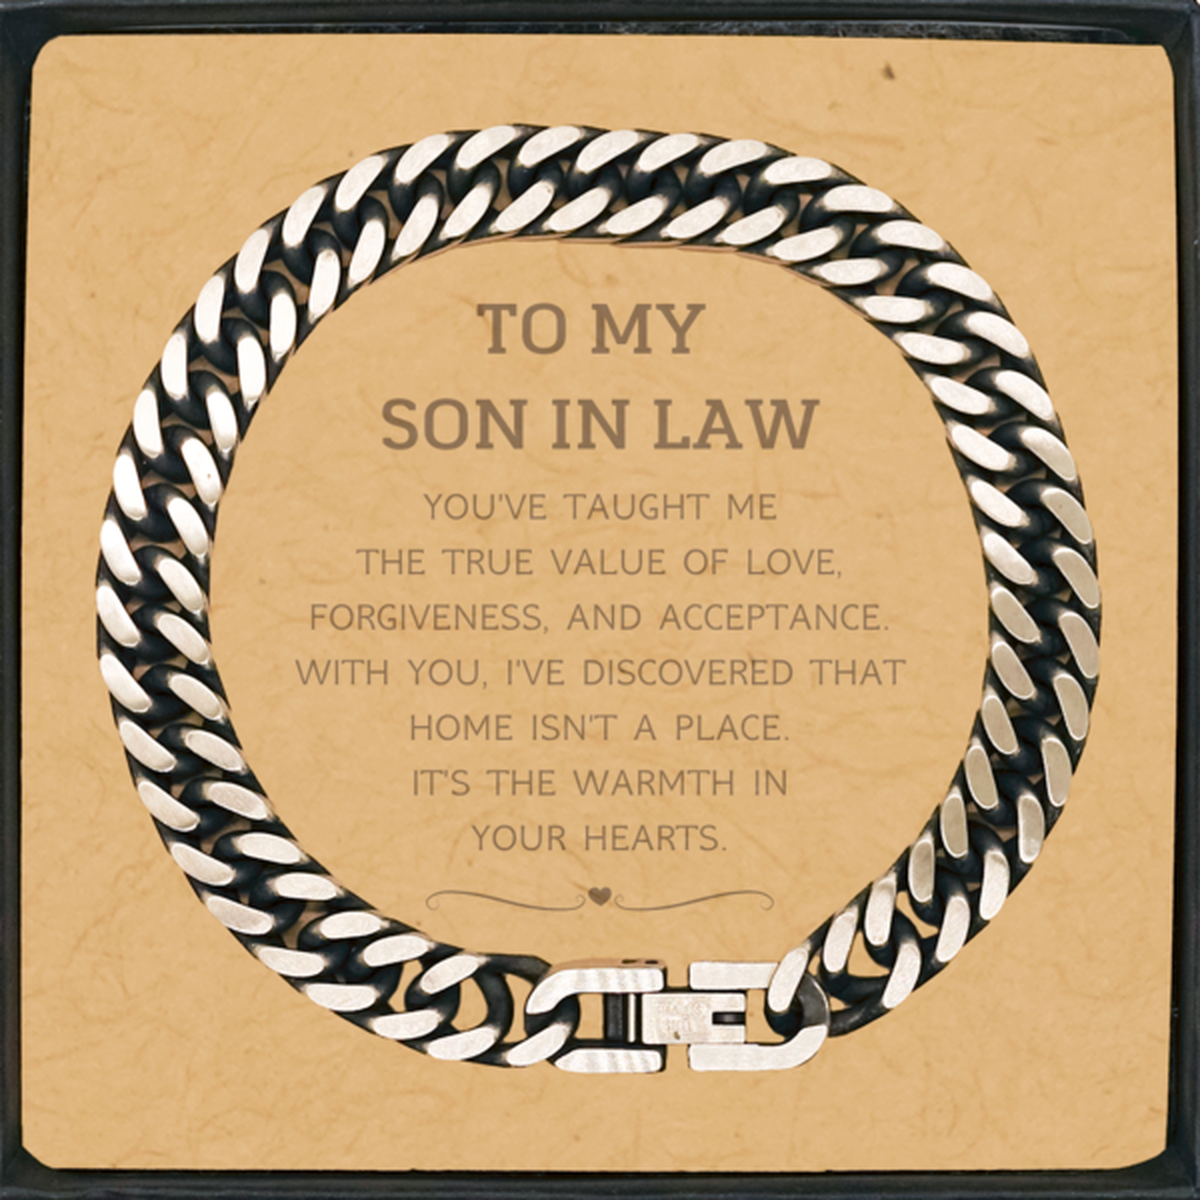 To My Son In Law Gifts, You've taught me the true value of love, Thank You Gifts For Son In Law, Birthday Cuban Link Chain Bracelet For Son In Law